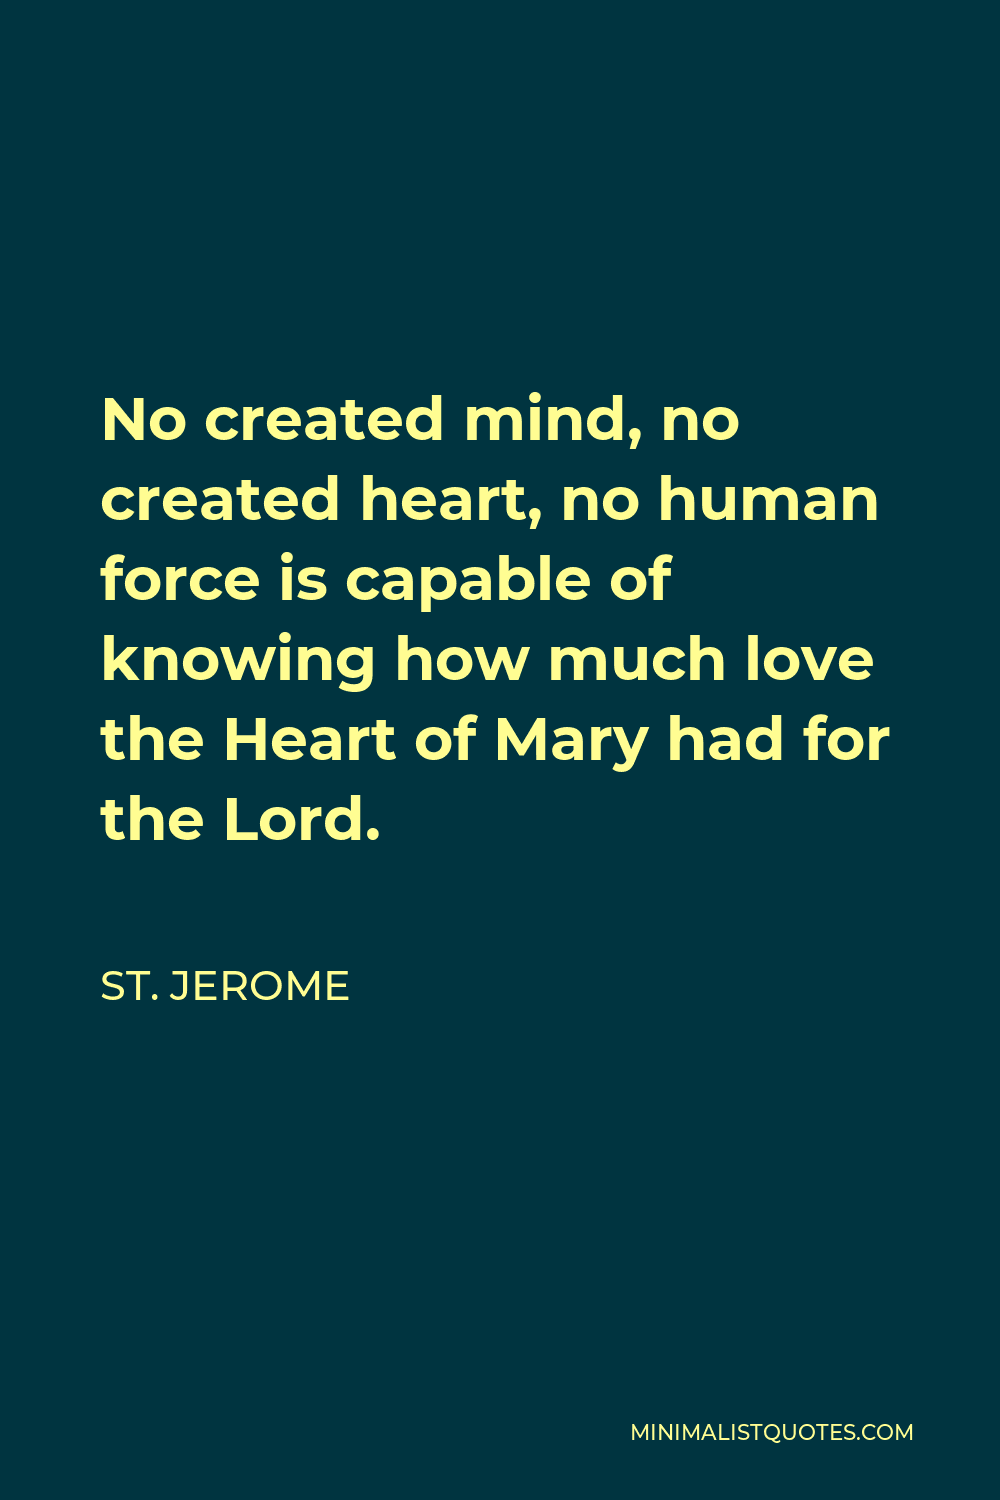 St. Jerome Quote - No created mind, no created heart, no human force is capable of knowing how much love the Heart of Mary had for the Lord.